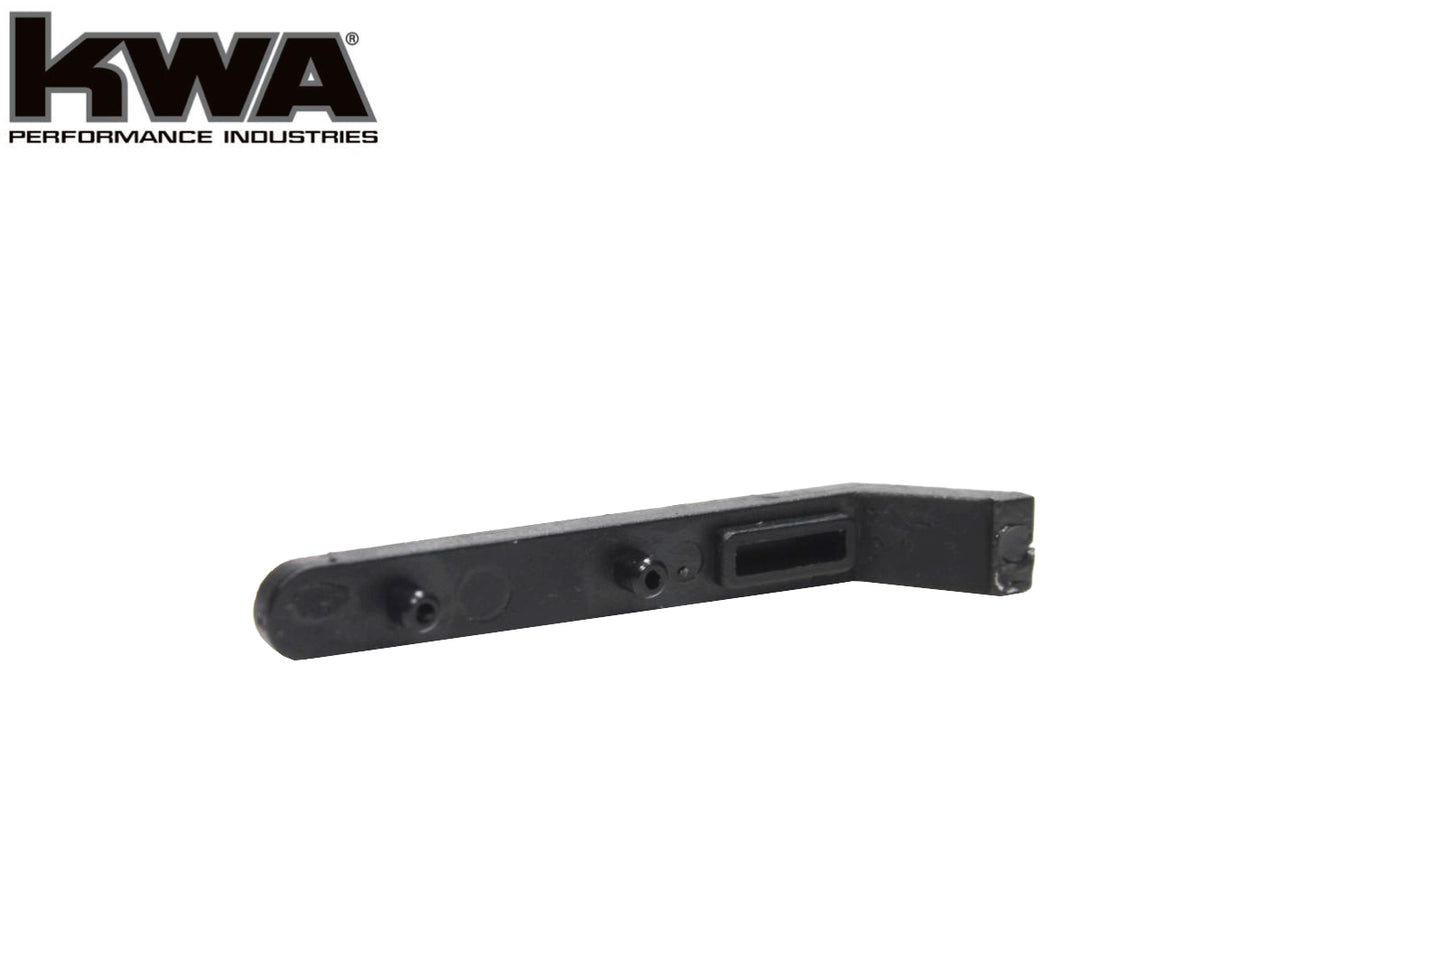 KWA Premium M9 Mock Slide Ejection Port Bar Replacement